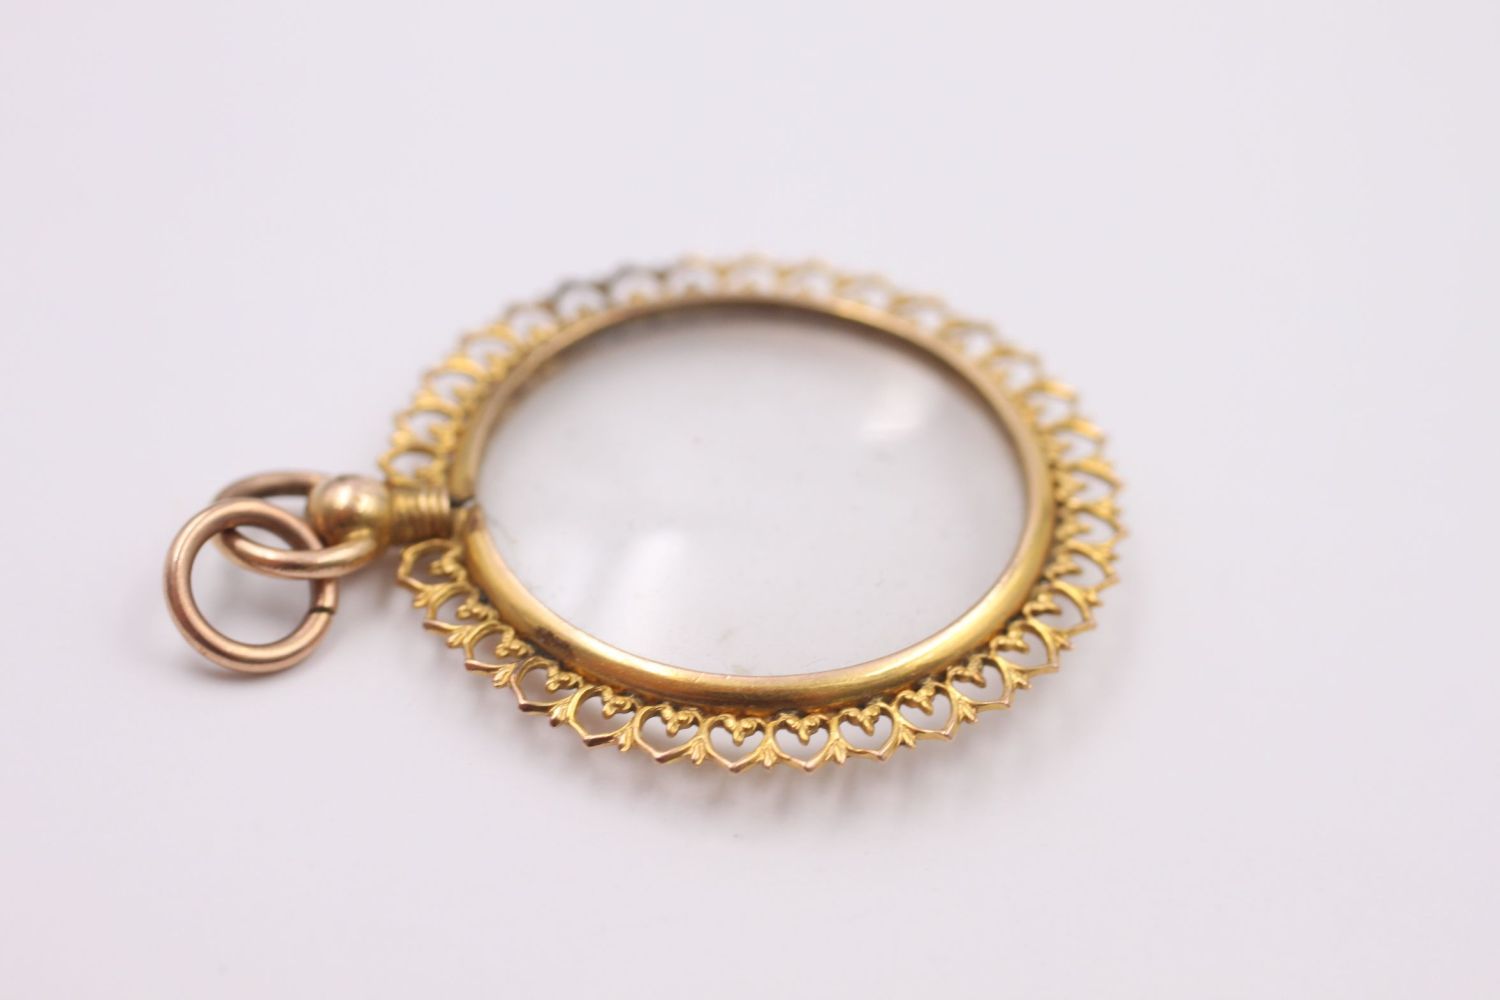 9ct gold double sided glass locket 4.2 grams gross - Image 3 of 4